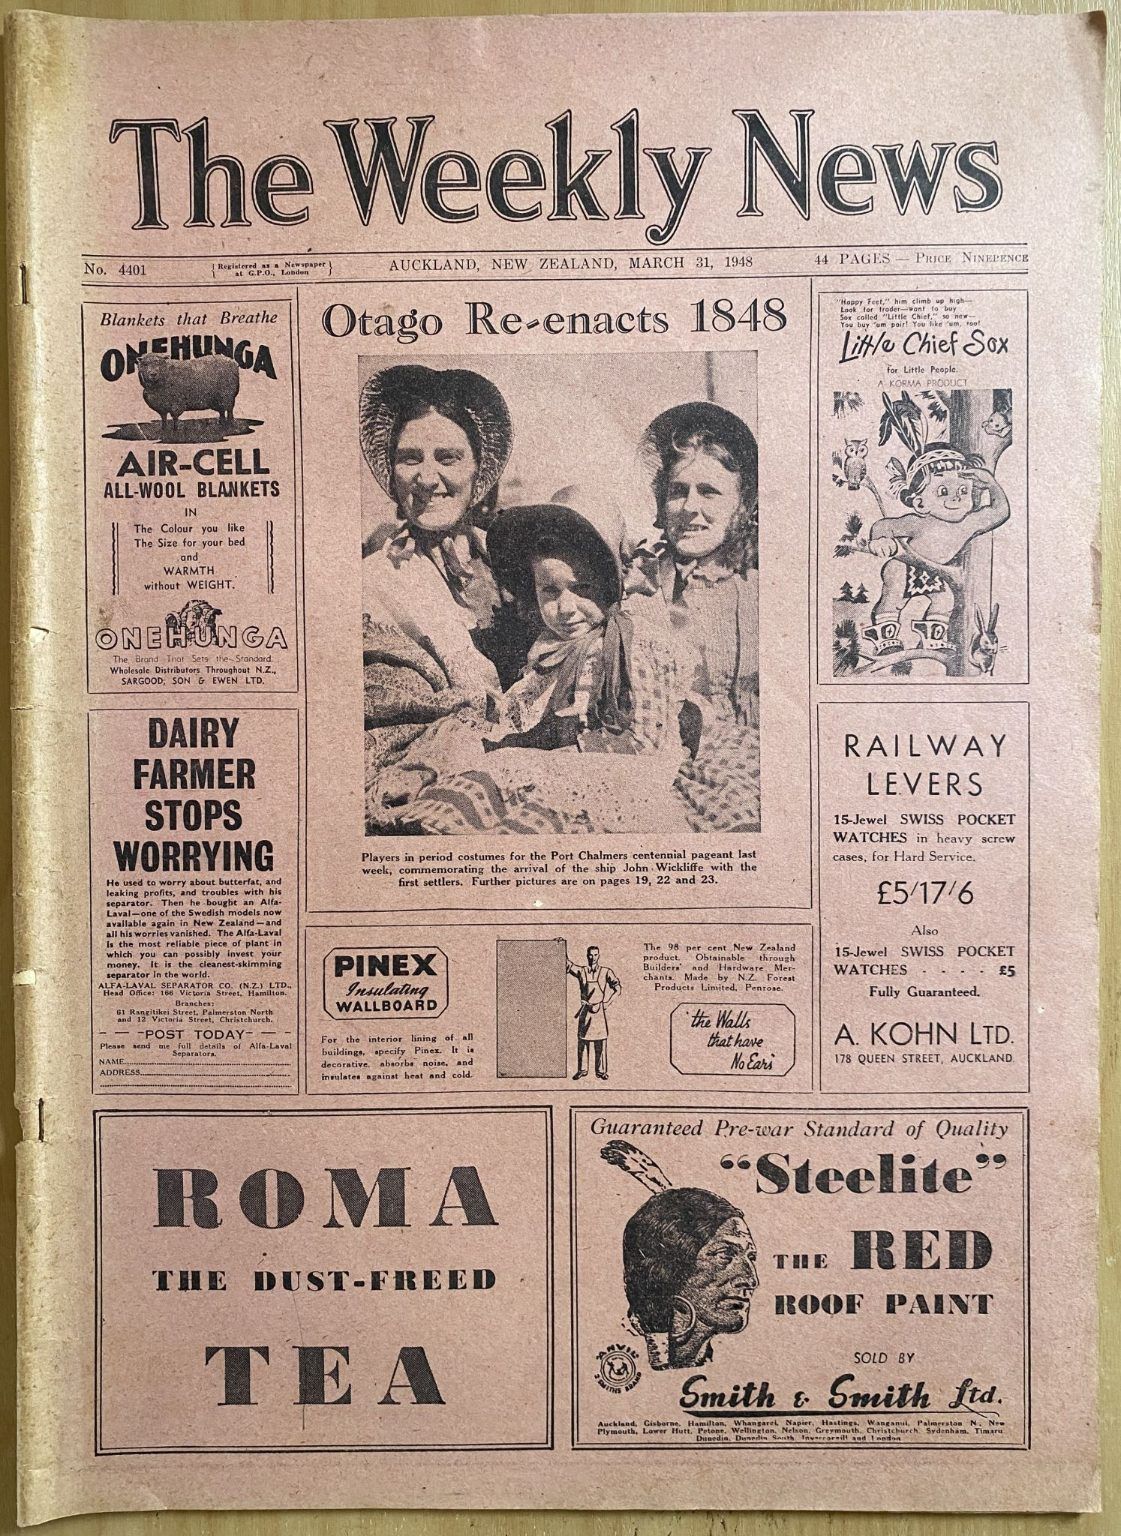 OLD NEWSPAPER: The Weekly News - No. 4401, 31 March 1948